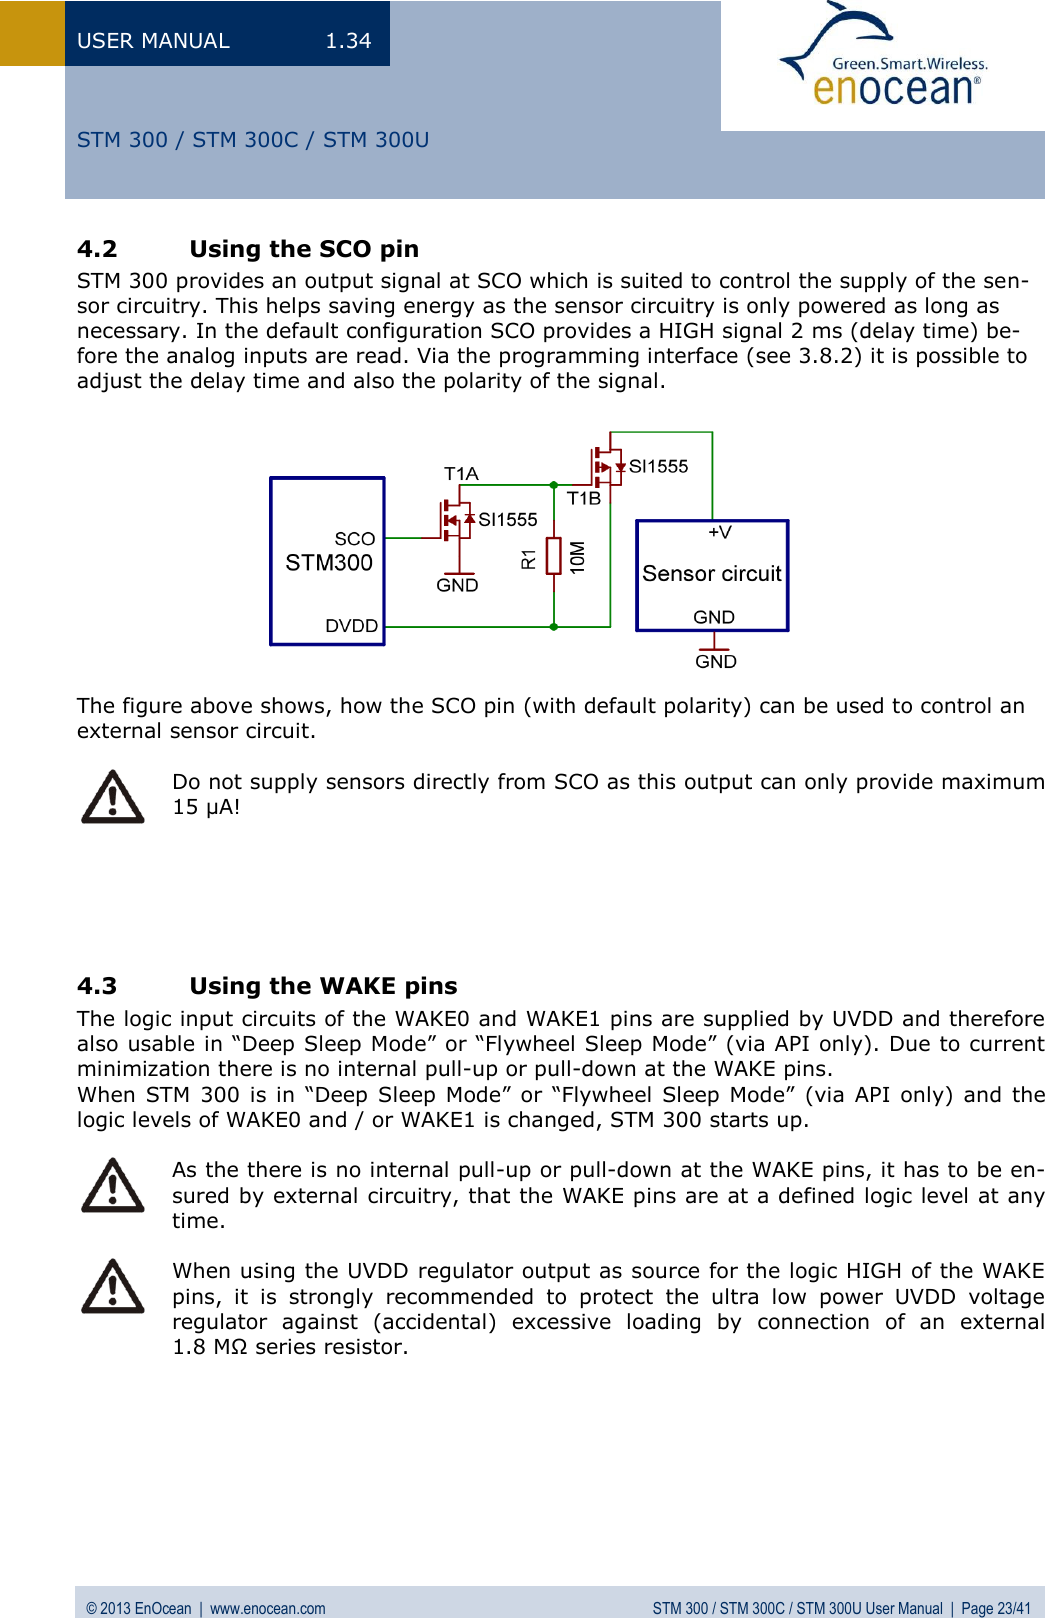 USER MANUAL  1.34 © 2013 EnOcean  |  www.enocean.com  STM 300 / STM 300C / STM 300U User Manual  |  Page 23/41   STM 300 / STM 300C / STM 300U 4.2 Using the SCO pin STM 300 provides an output signal at SCO which is suited to control the supply of the sen-sor circuitry. This helps saving energy as the sensor circuitry is only powered as long as necessary. In the default configuration SCO provides a HIGH signal 2 ms (delay time) be-fore the analog inputs are read. Via the programming interface (see 3.8.2) it is possible to adjust the delay time and also the polarity of the signal.             The figure above shows, how the SCO pin (with default polarity) can be used to control an external sensor circuit.   Do not supply sensors directly from SCO as this output can only provide maximum 15 µA!      4.3 Using the WAKE pins  The logic input circuits of the WAKE0 and WAKE1 pins are supplied by UVDD and therefore also usable in “Deep Sleep Mode” or “Flywheel Sleep Mode” (via API only). Due to current minimization there is no internal pull-up or pull-down at the WAKE pins. When STM 300 is  in  “Deep  Sleep Mode”  or  “Flywheel  Sleep Mode”  (via  API only)  and  the logic levels of WAKE0 and / or WAKE1 is changed, STM 300 starts up.   As the there is no internal pull-up or pull-down at the WAKE pins, it has to be en-sured by external circuitry, that the WAKE pins are at a defined logic level at any time.   When using the UVDD regulator output as source for the logic HIGH of the WAKE pins,  it  is  strongly  recommended  to  protect  the  ultra  low  power  UVDD  voltage regulator  against  (accidental)  excessive  loading  by  connection  of  an  external 1.8 MΩ series resistor.    